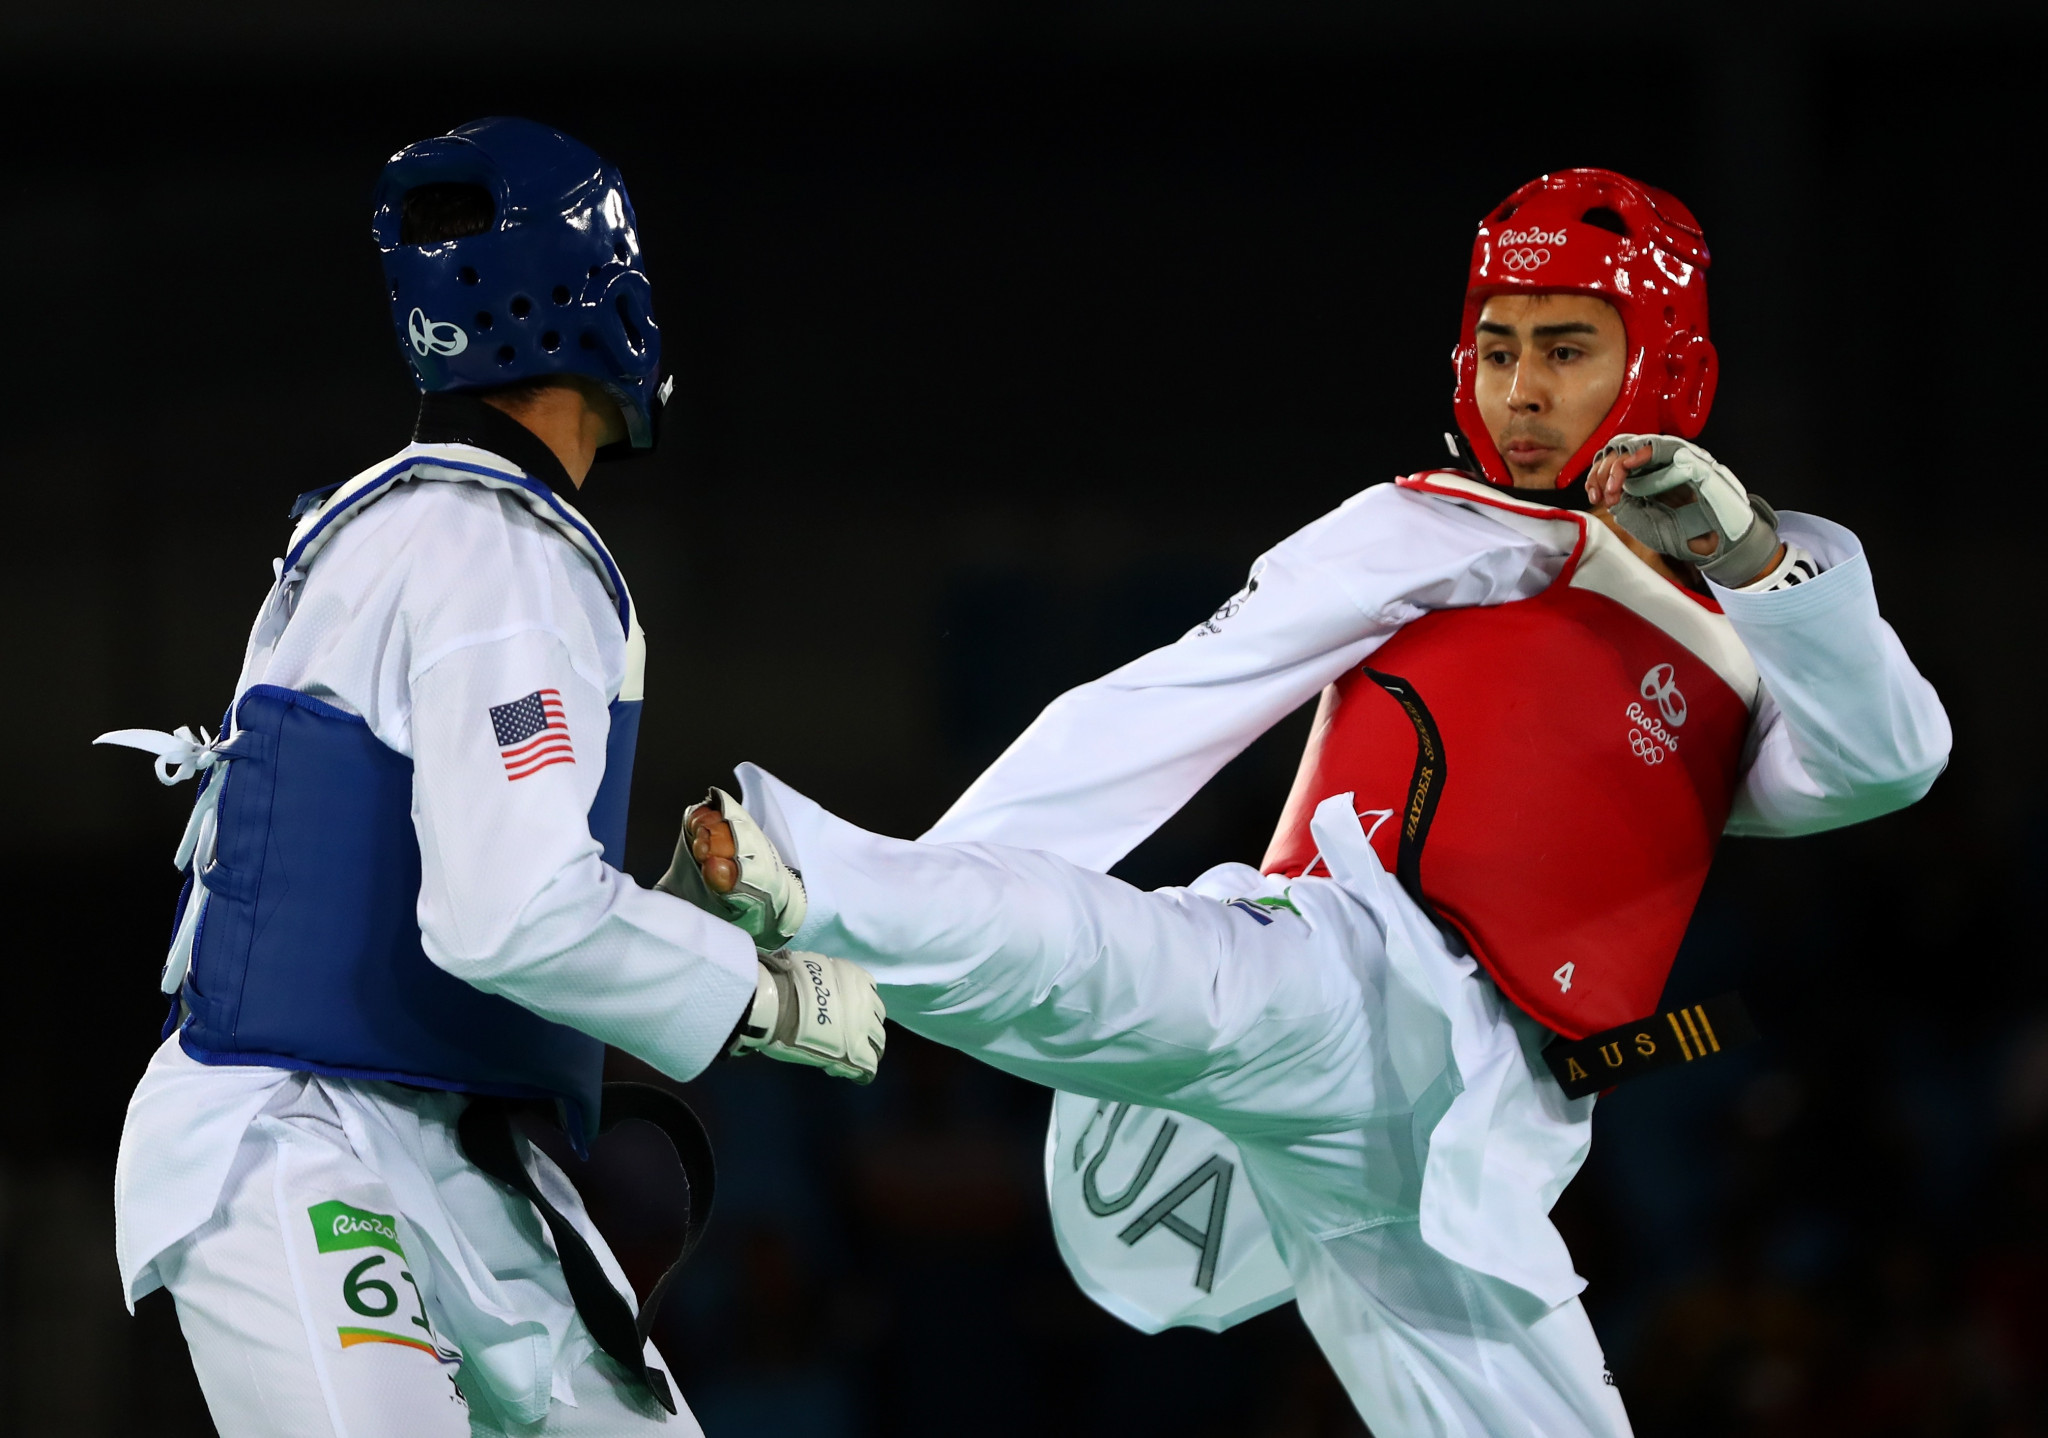 Hayder Shkara was one of four athletes that represented Australia in taekwondo at the Rio 2016 Olympic Games ©Getty Images